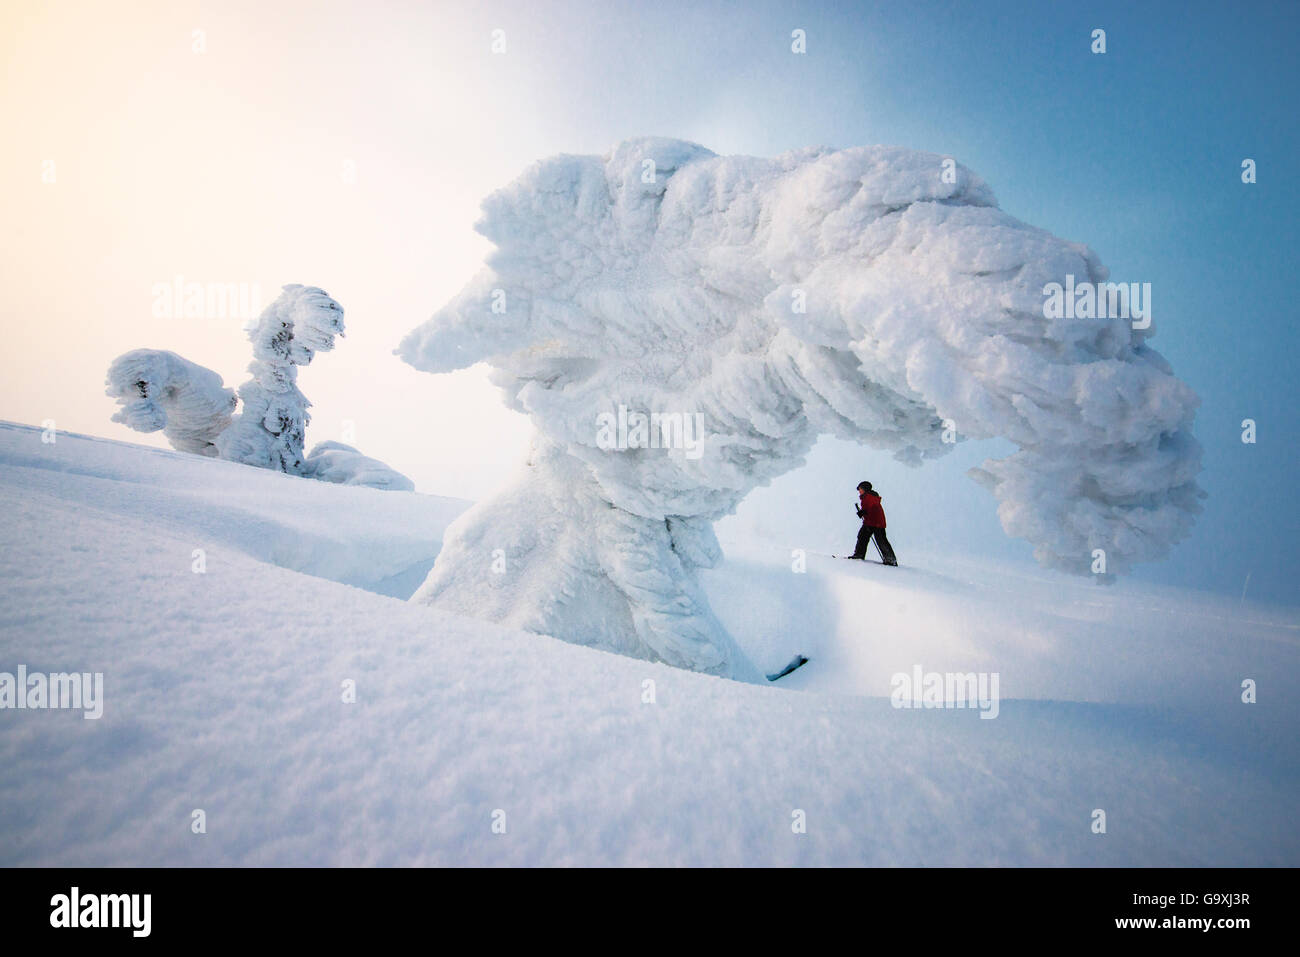 Boy on skis going up slope, framed by snow laden tree, Norway, February 2014. Stock Photo